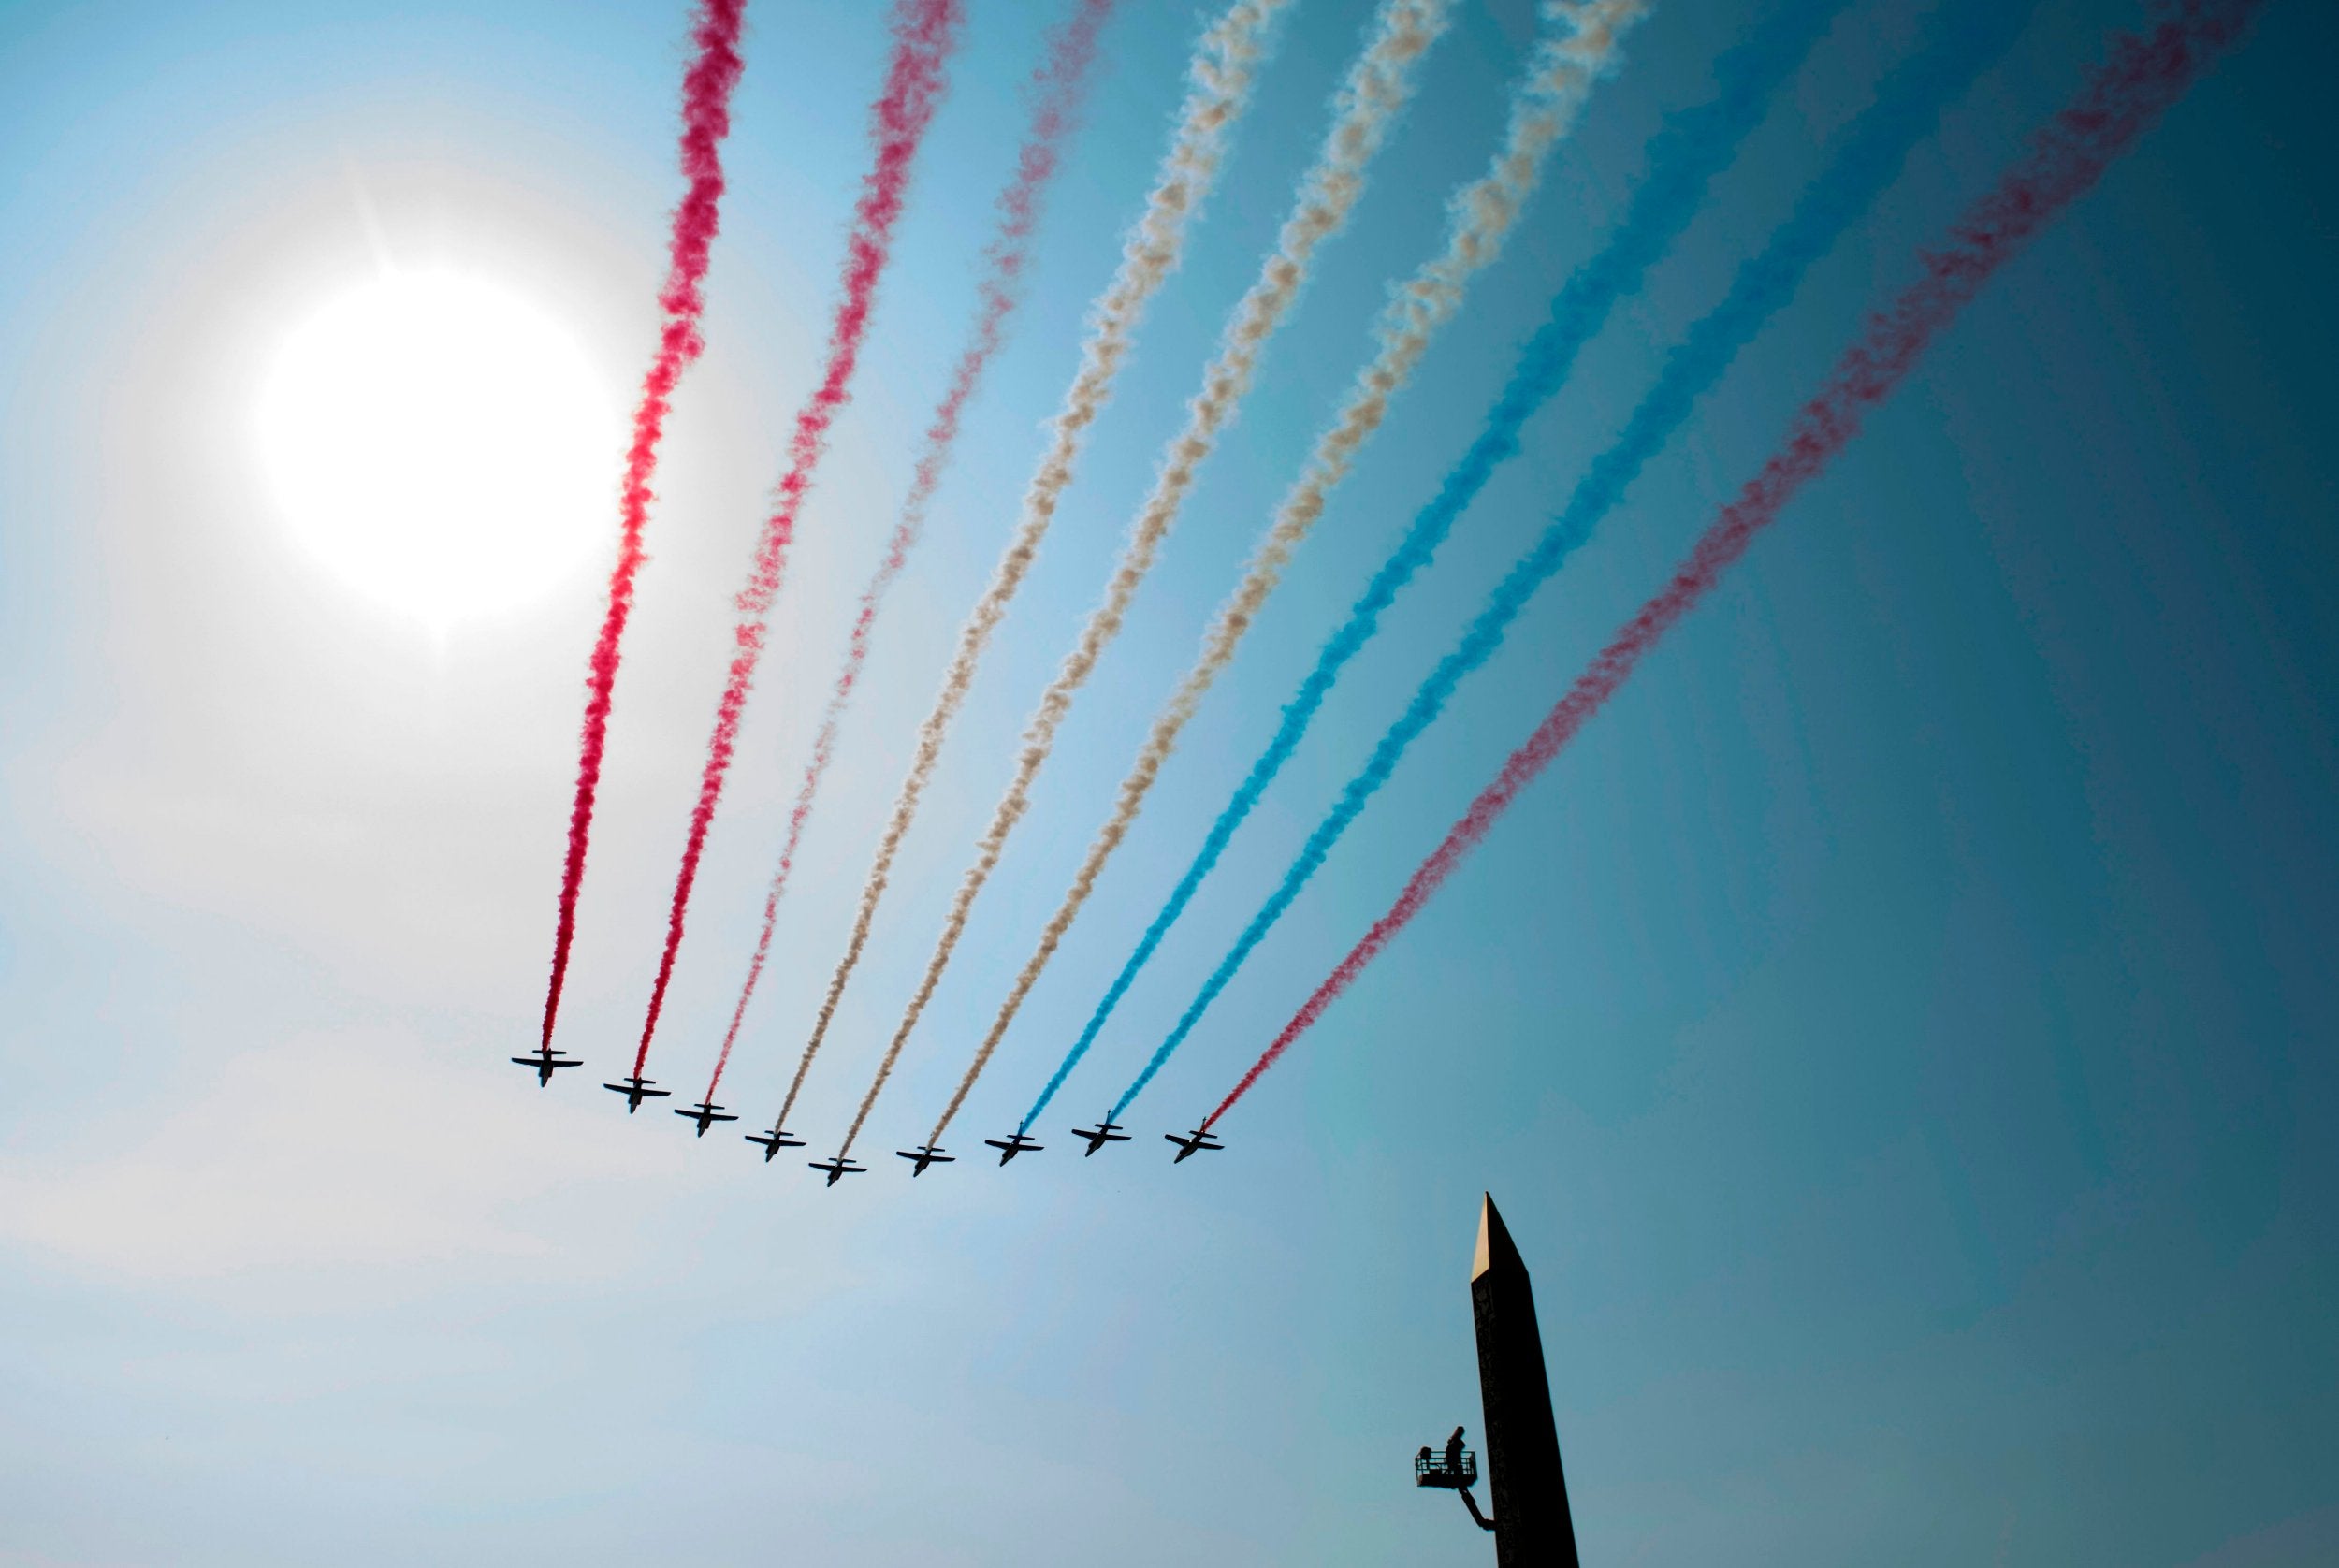 Warplanes roared the skies and traditional parties took place up and down the country.